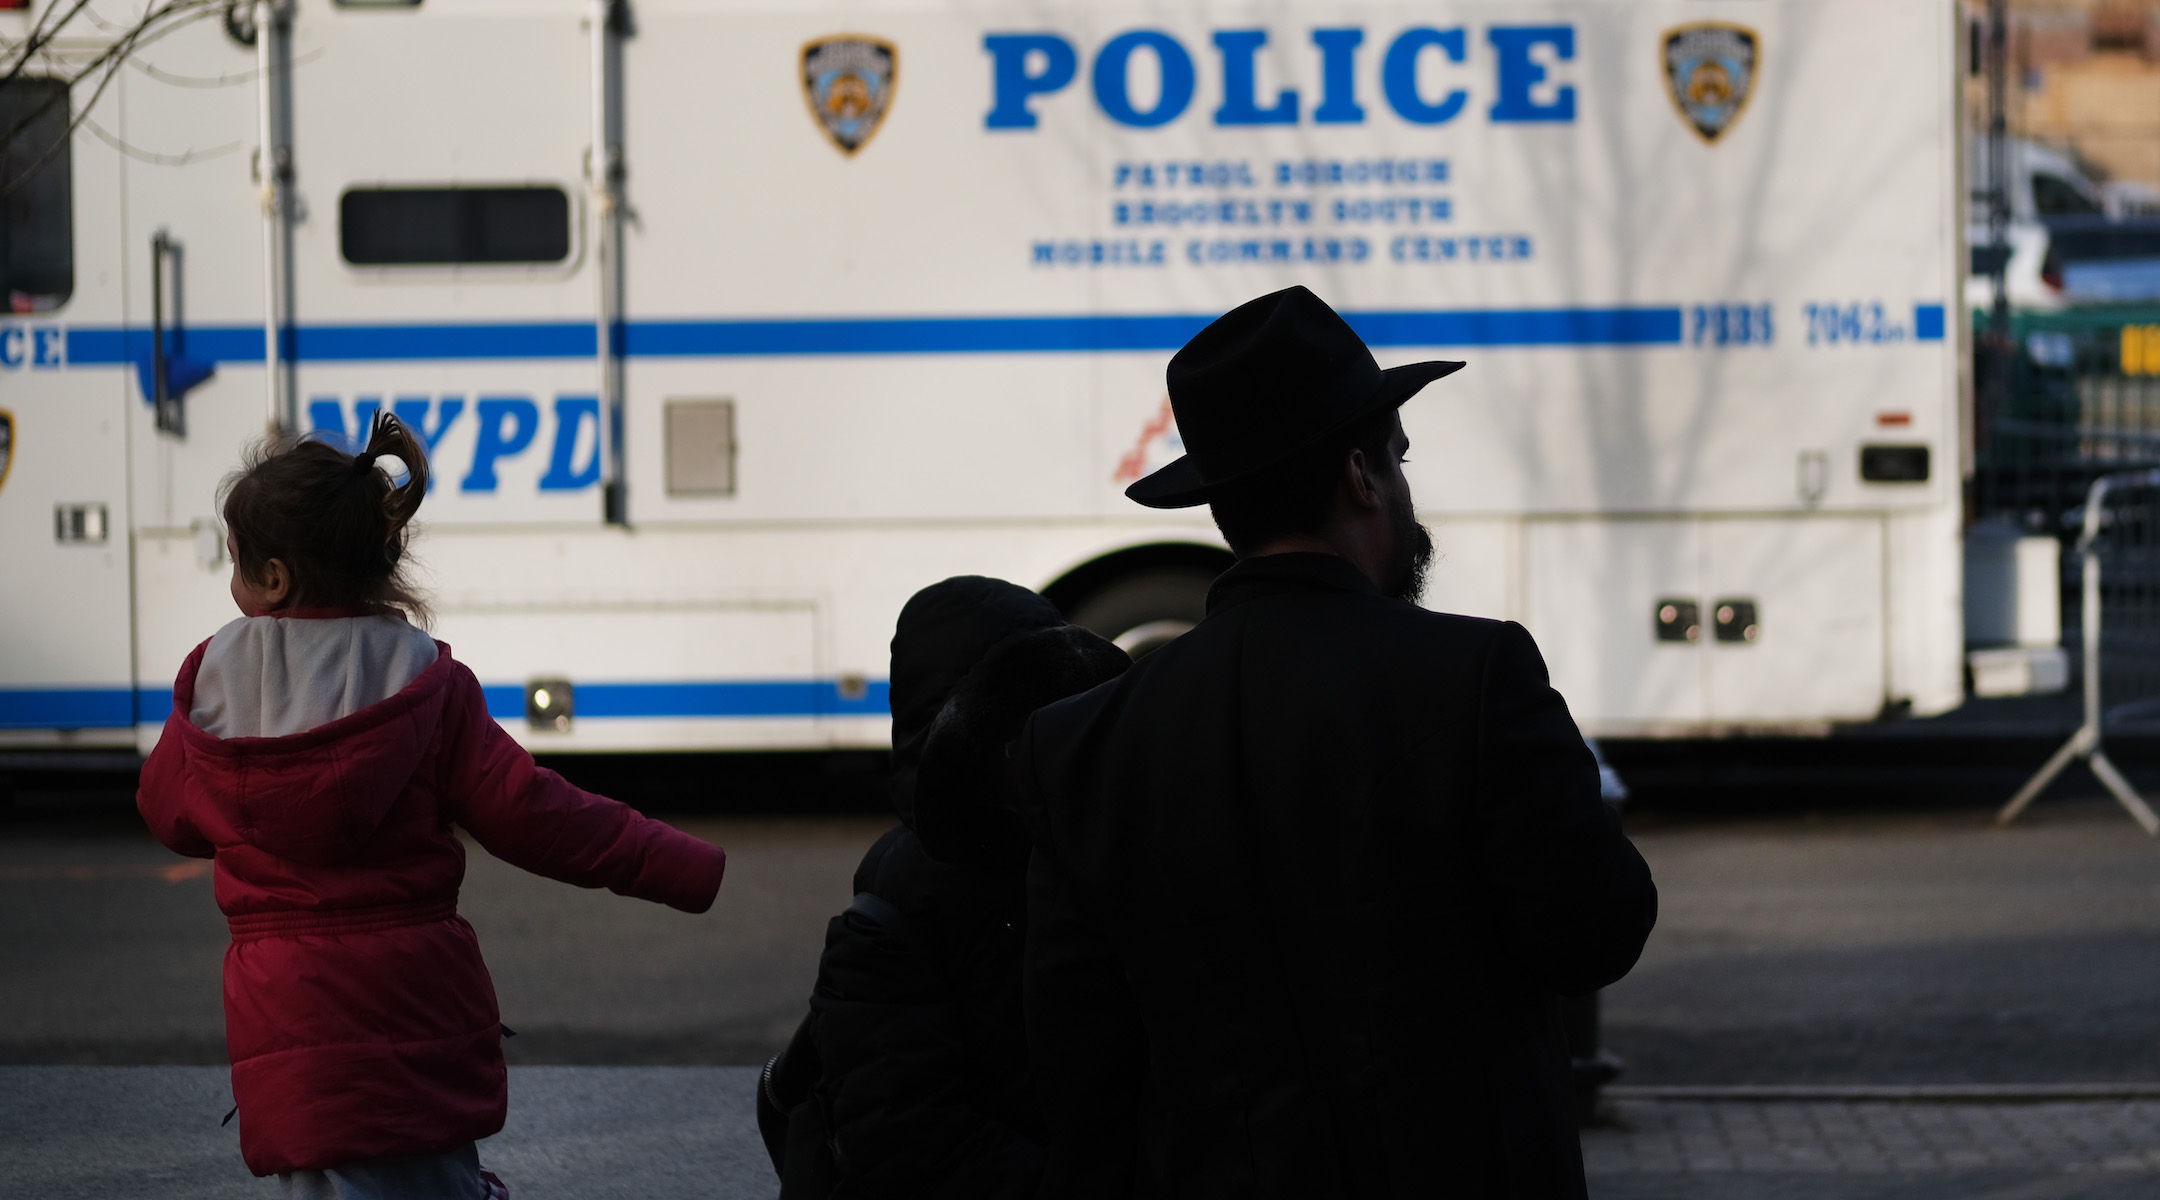 A man and girl in the Crown Heights neighborhood of Brooklyn stand opposite a police van, Dec. 31, 2019. Brooklyn was the location of more than one-third of the total number of anti-Semitic assaults committed last year, according to the Anti-Defamation League. (Spencer Platt/Getty Images)